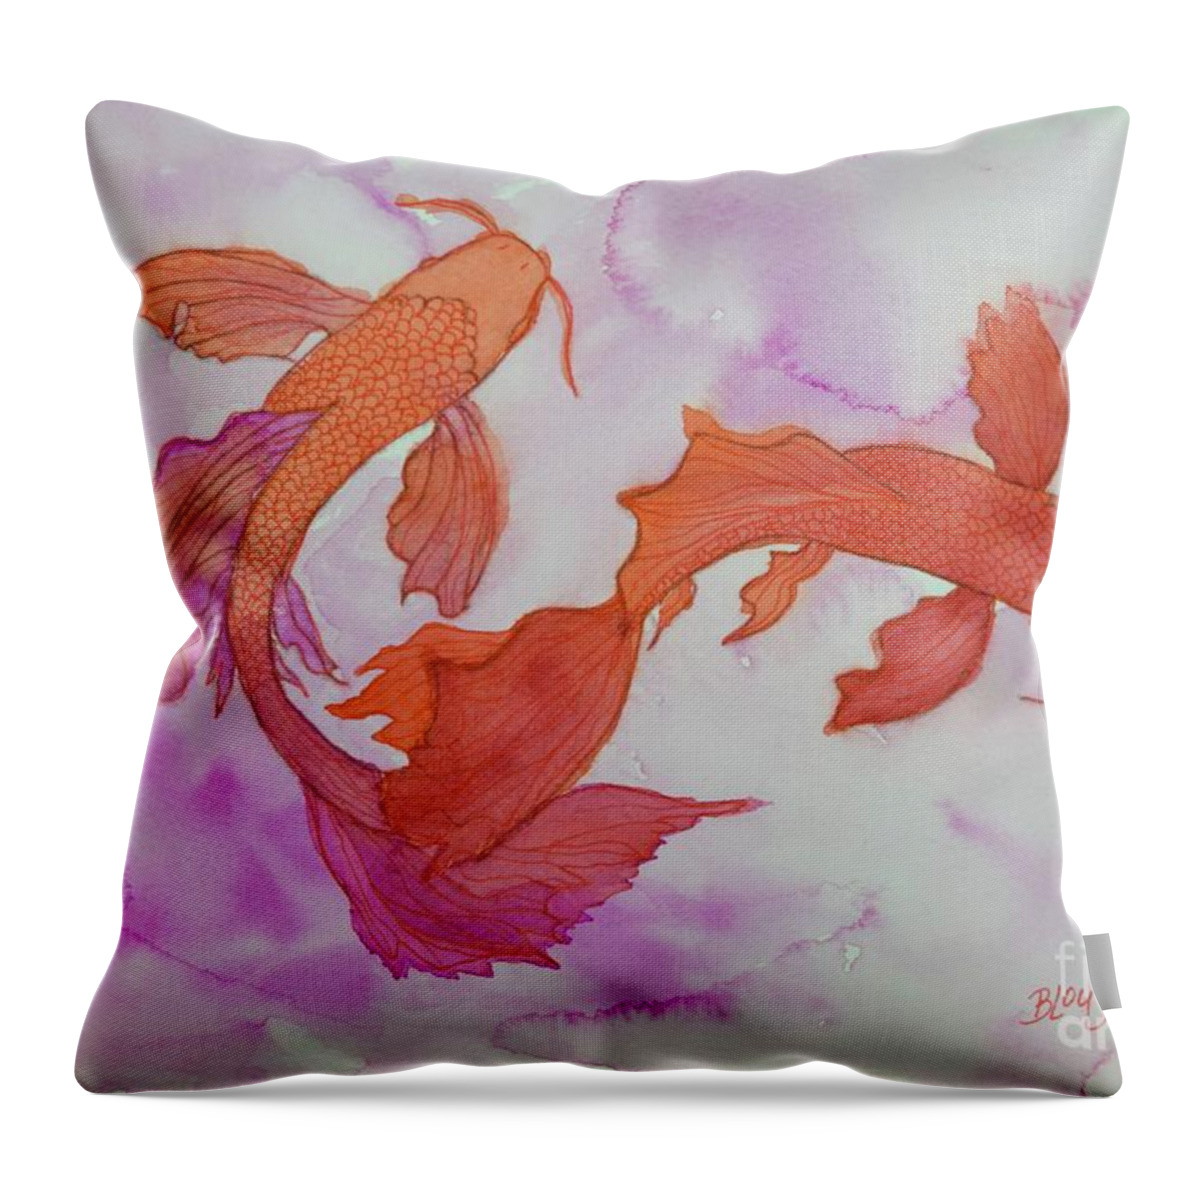  Barrieloustark Throw Pillow featuring the painting Two Koi by Barrie Stark